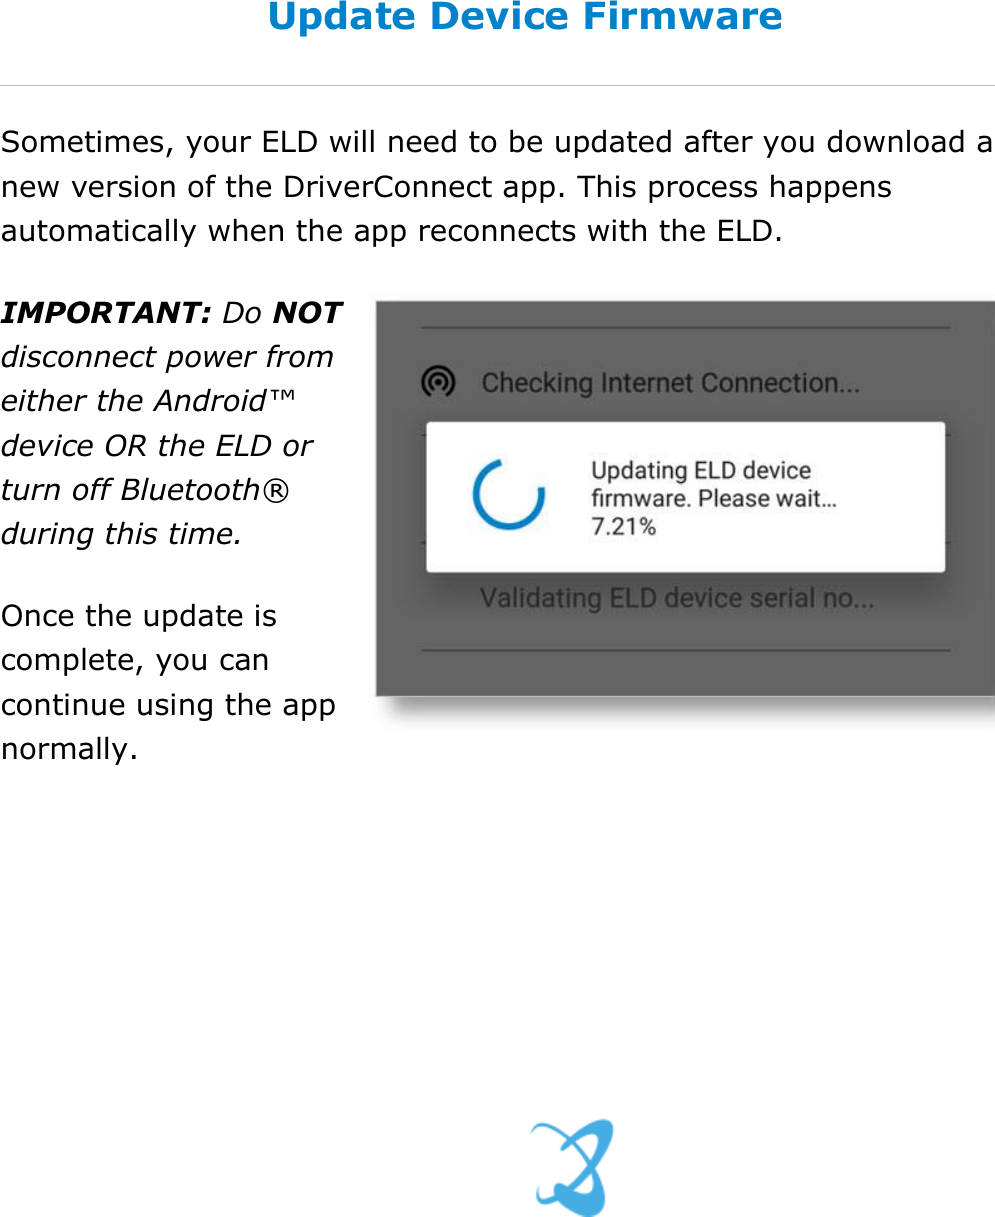 Set My Duty Status DriverConnect User Guide  20 © 2017, Rand McNally, Inc. Update Device Firmware Sometimes, your ELD will need to be updated after you download a new version of the DriverConnect app. This process happens automatically when the app reconnects with the ELD. IMPORTANT: Do NOT disconnect power from either the Android™ device OR the ELD or turn off Bluetooth® during this time. Once the update is complete, you can continue using the app normally.    